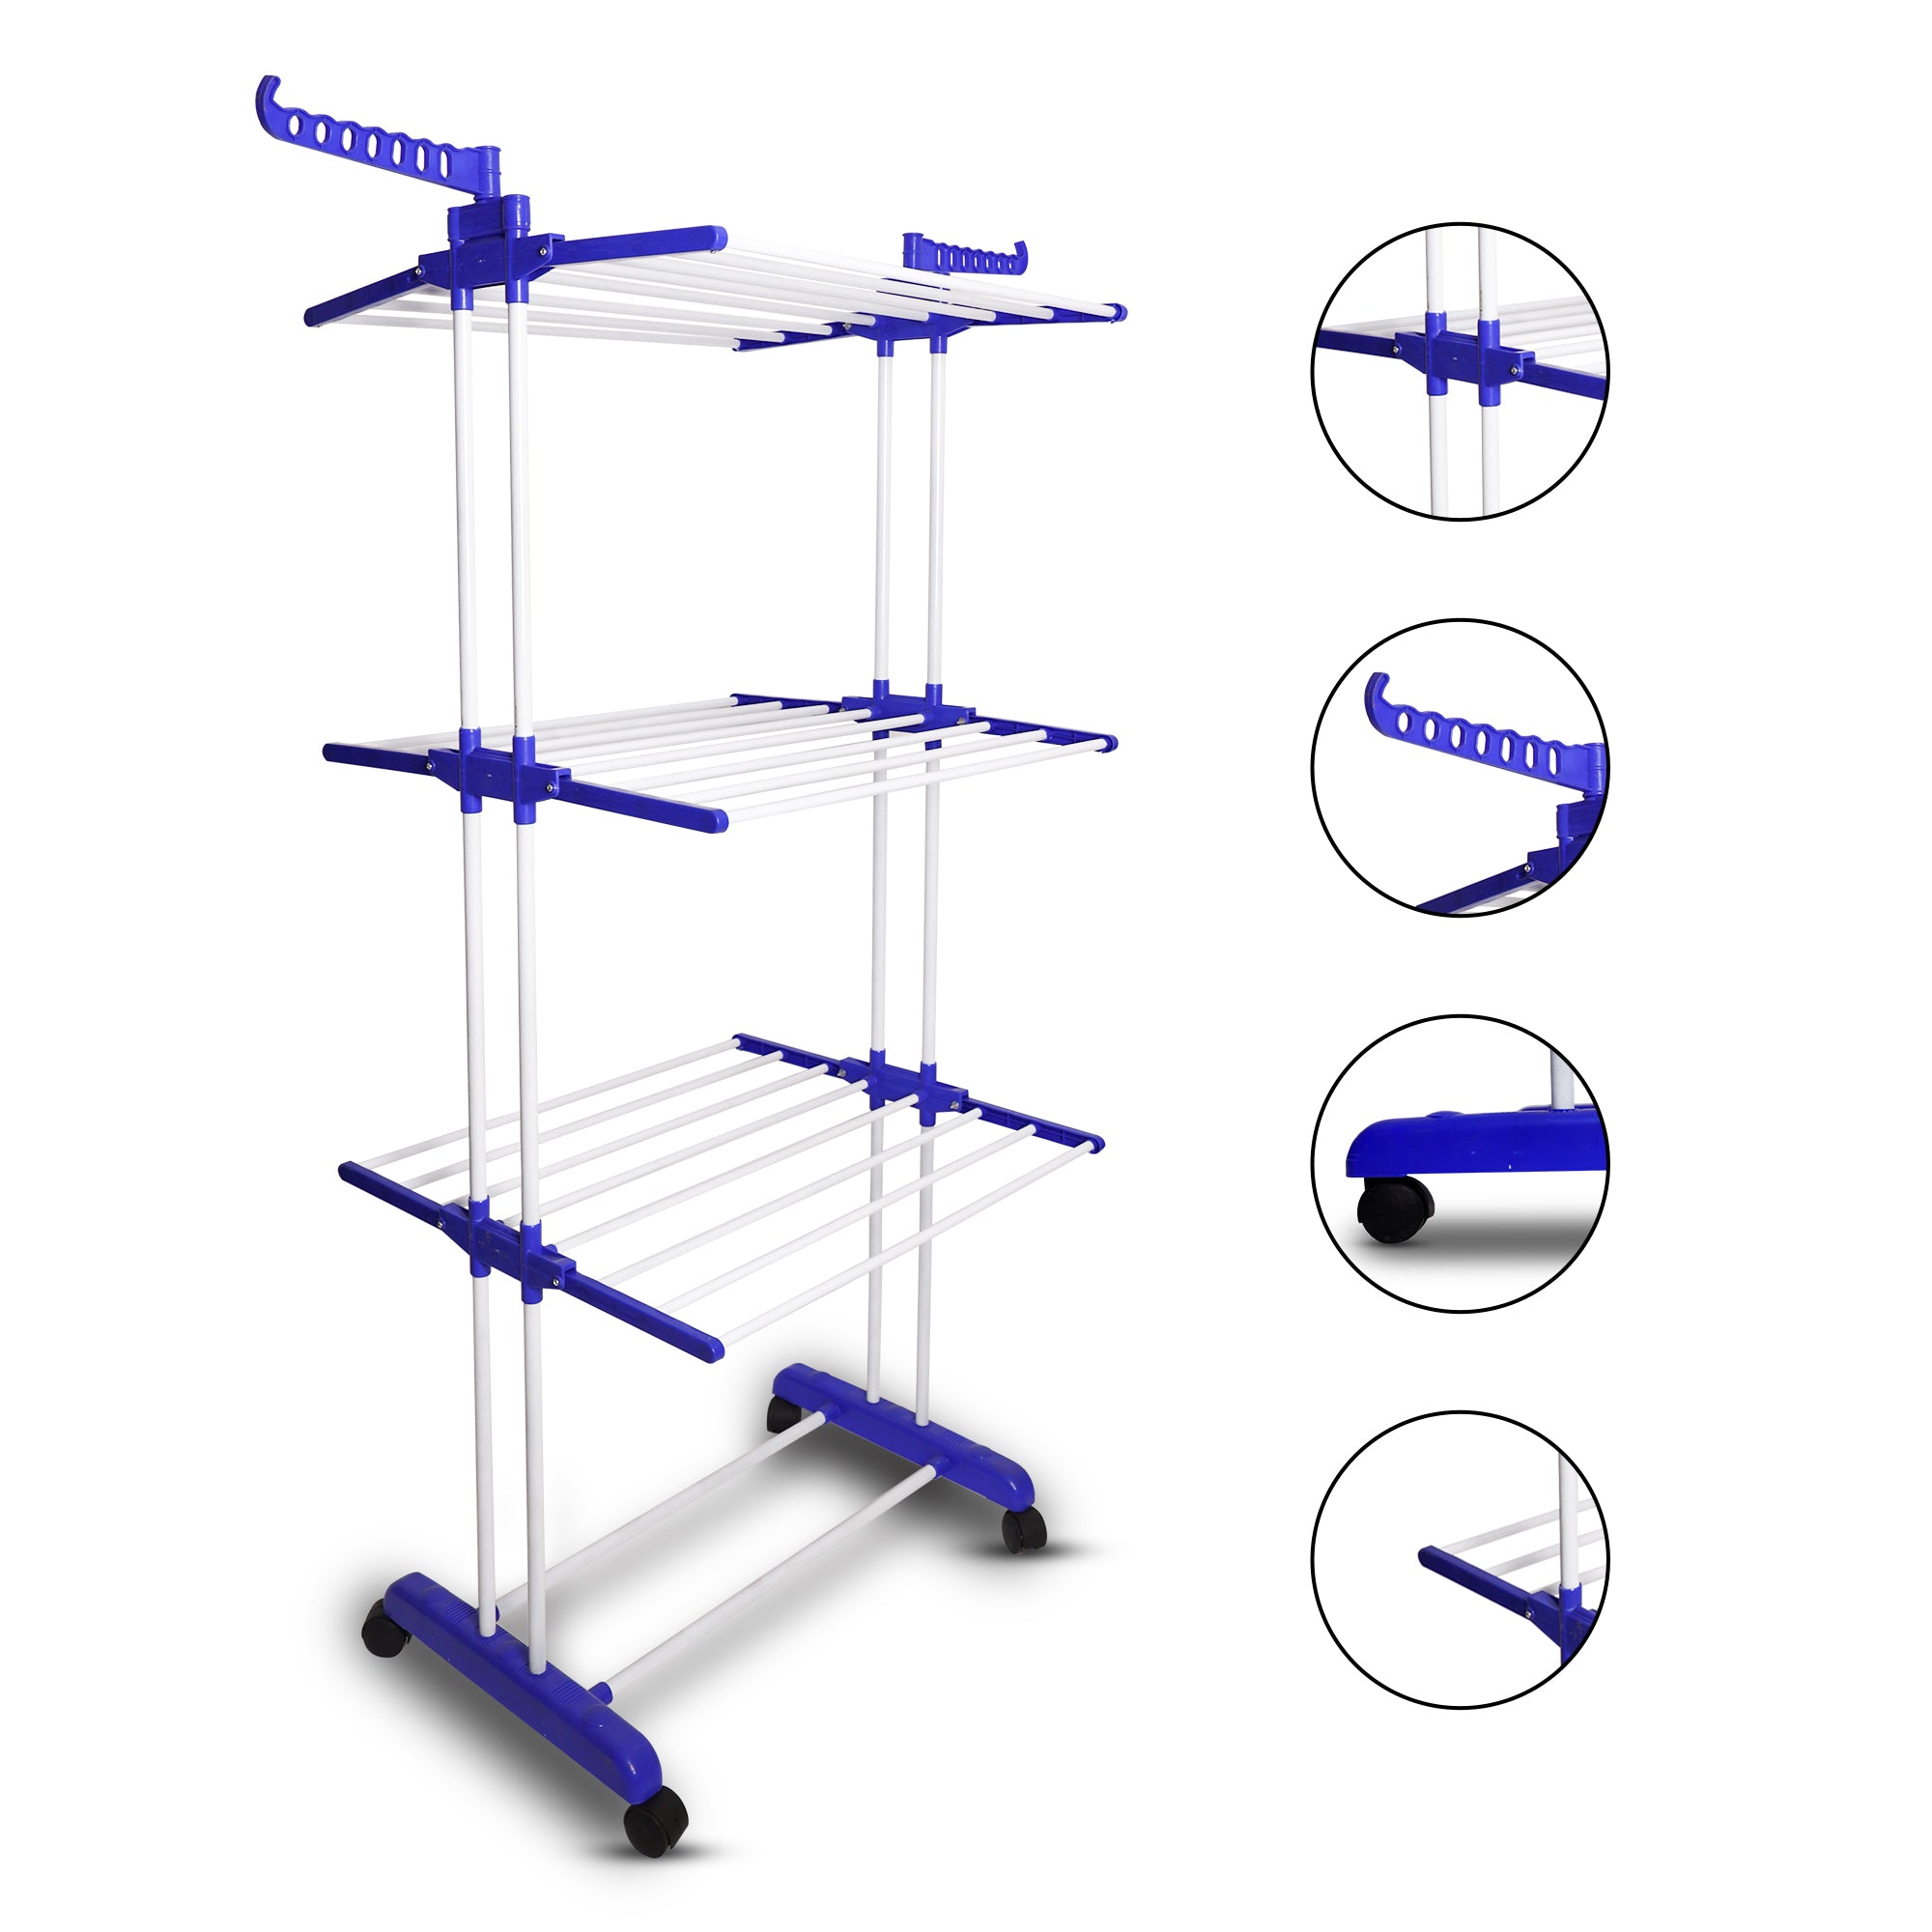 MegaDry Cloth Drying Stand | 3-Tier Small Foldable Powder Coated Mild Steel I Blue